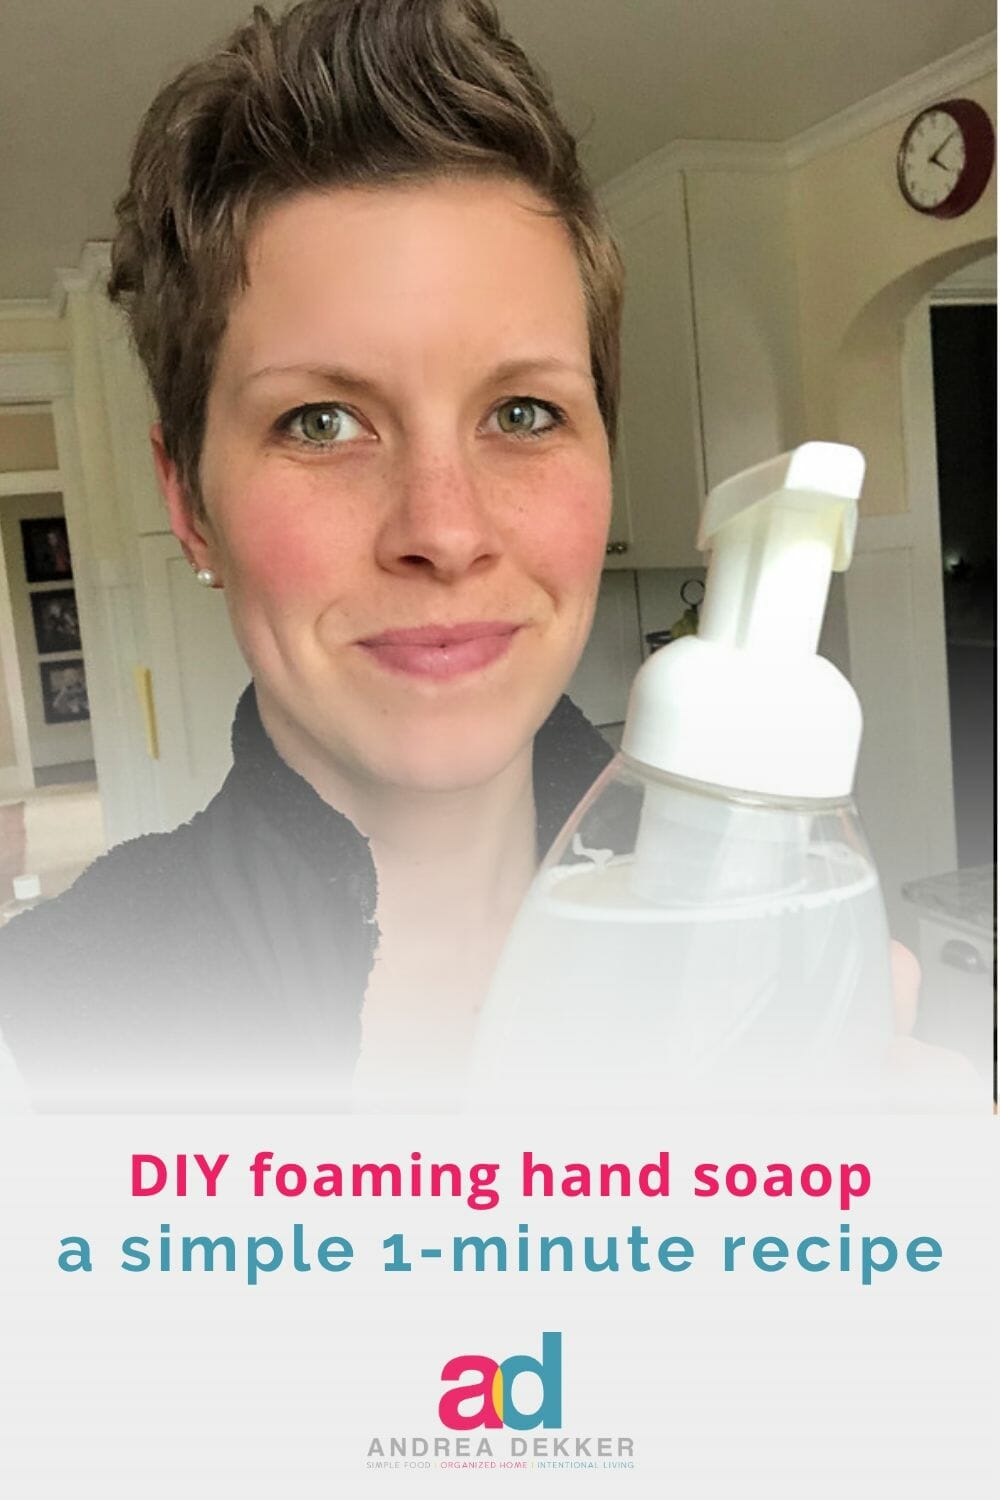 Get this simple recipe for all-natural DIY foaming hand soap and make your own foaming hand soap in less than 1 minute, for only pennies a bottle! Your kids will love it and they might just wash their hands a bit more... maybe! via @andreadekker